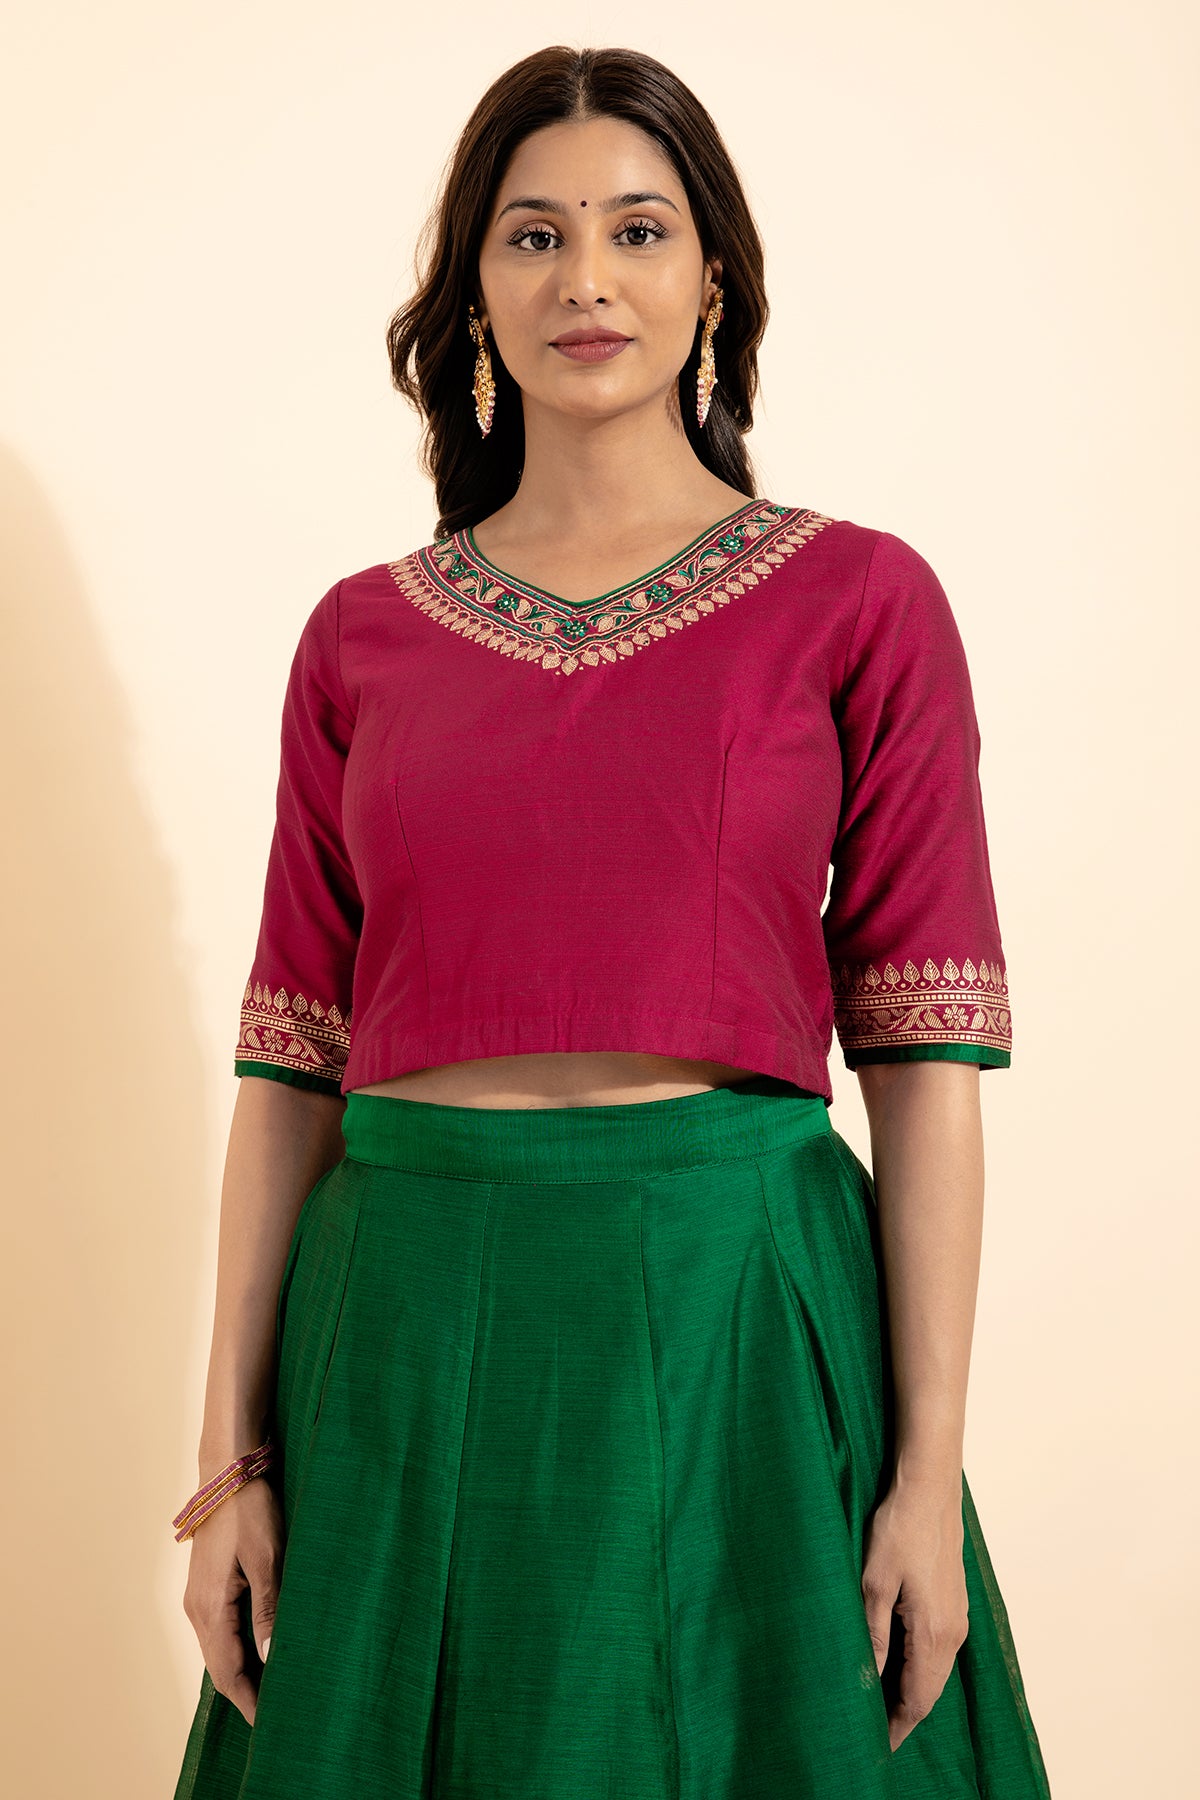 Jewel Embroidered Neckline Top With Floral Printed Skirt Set - Magenta & Green